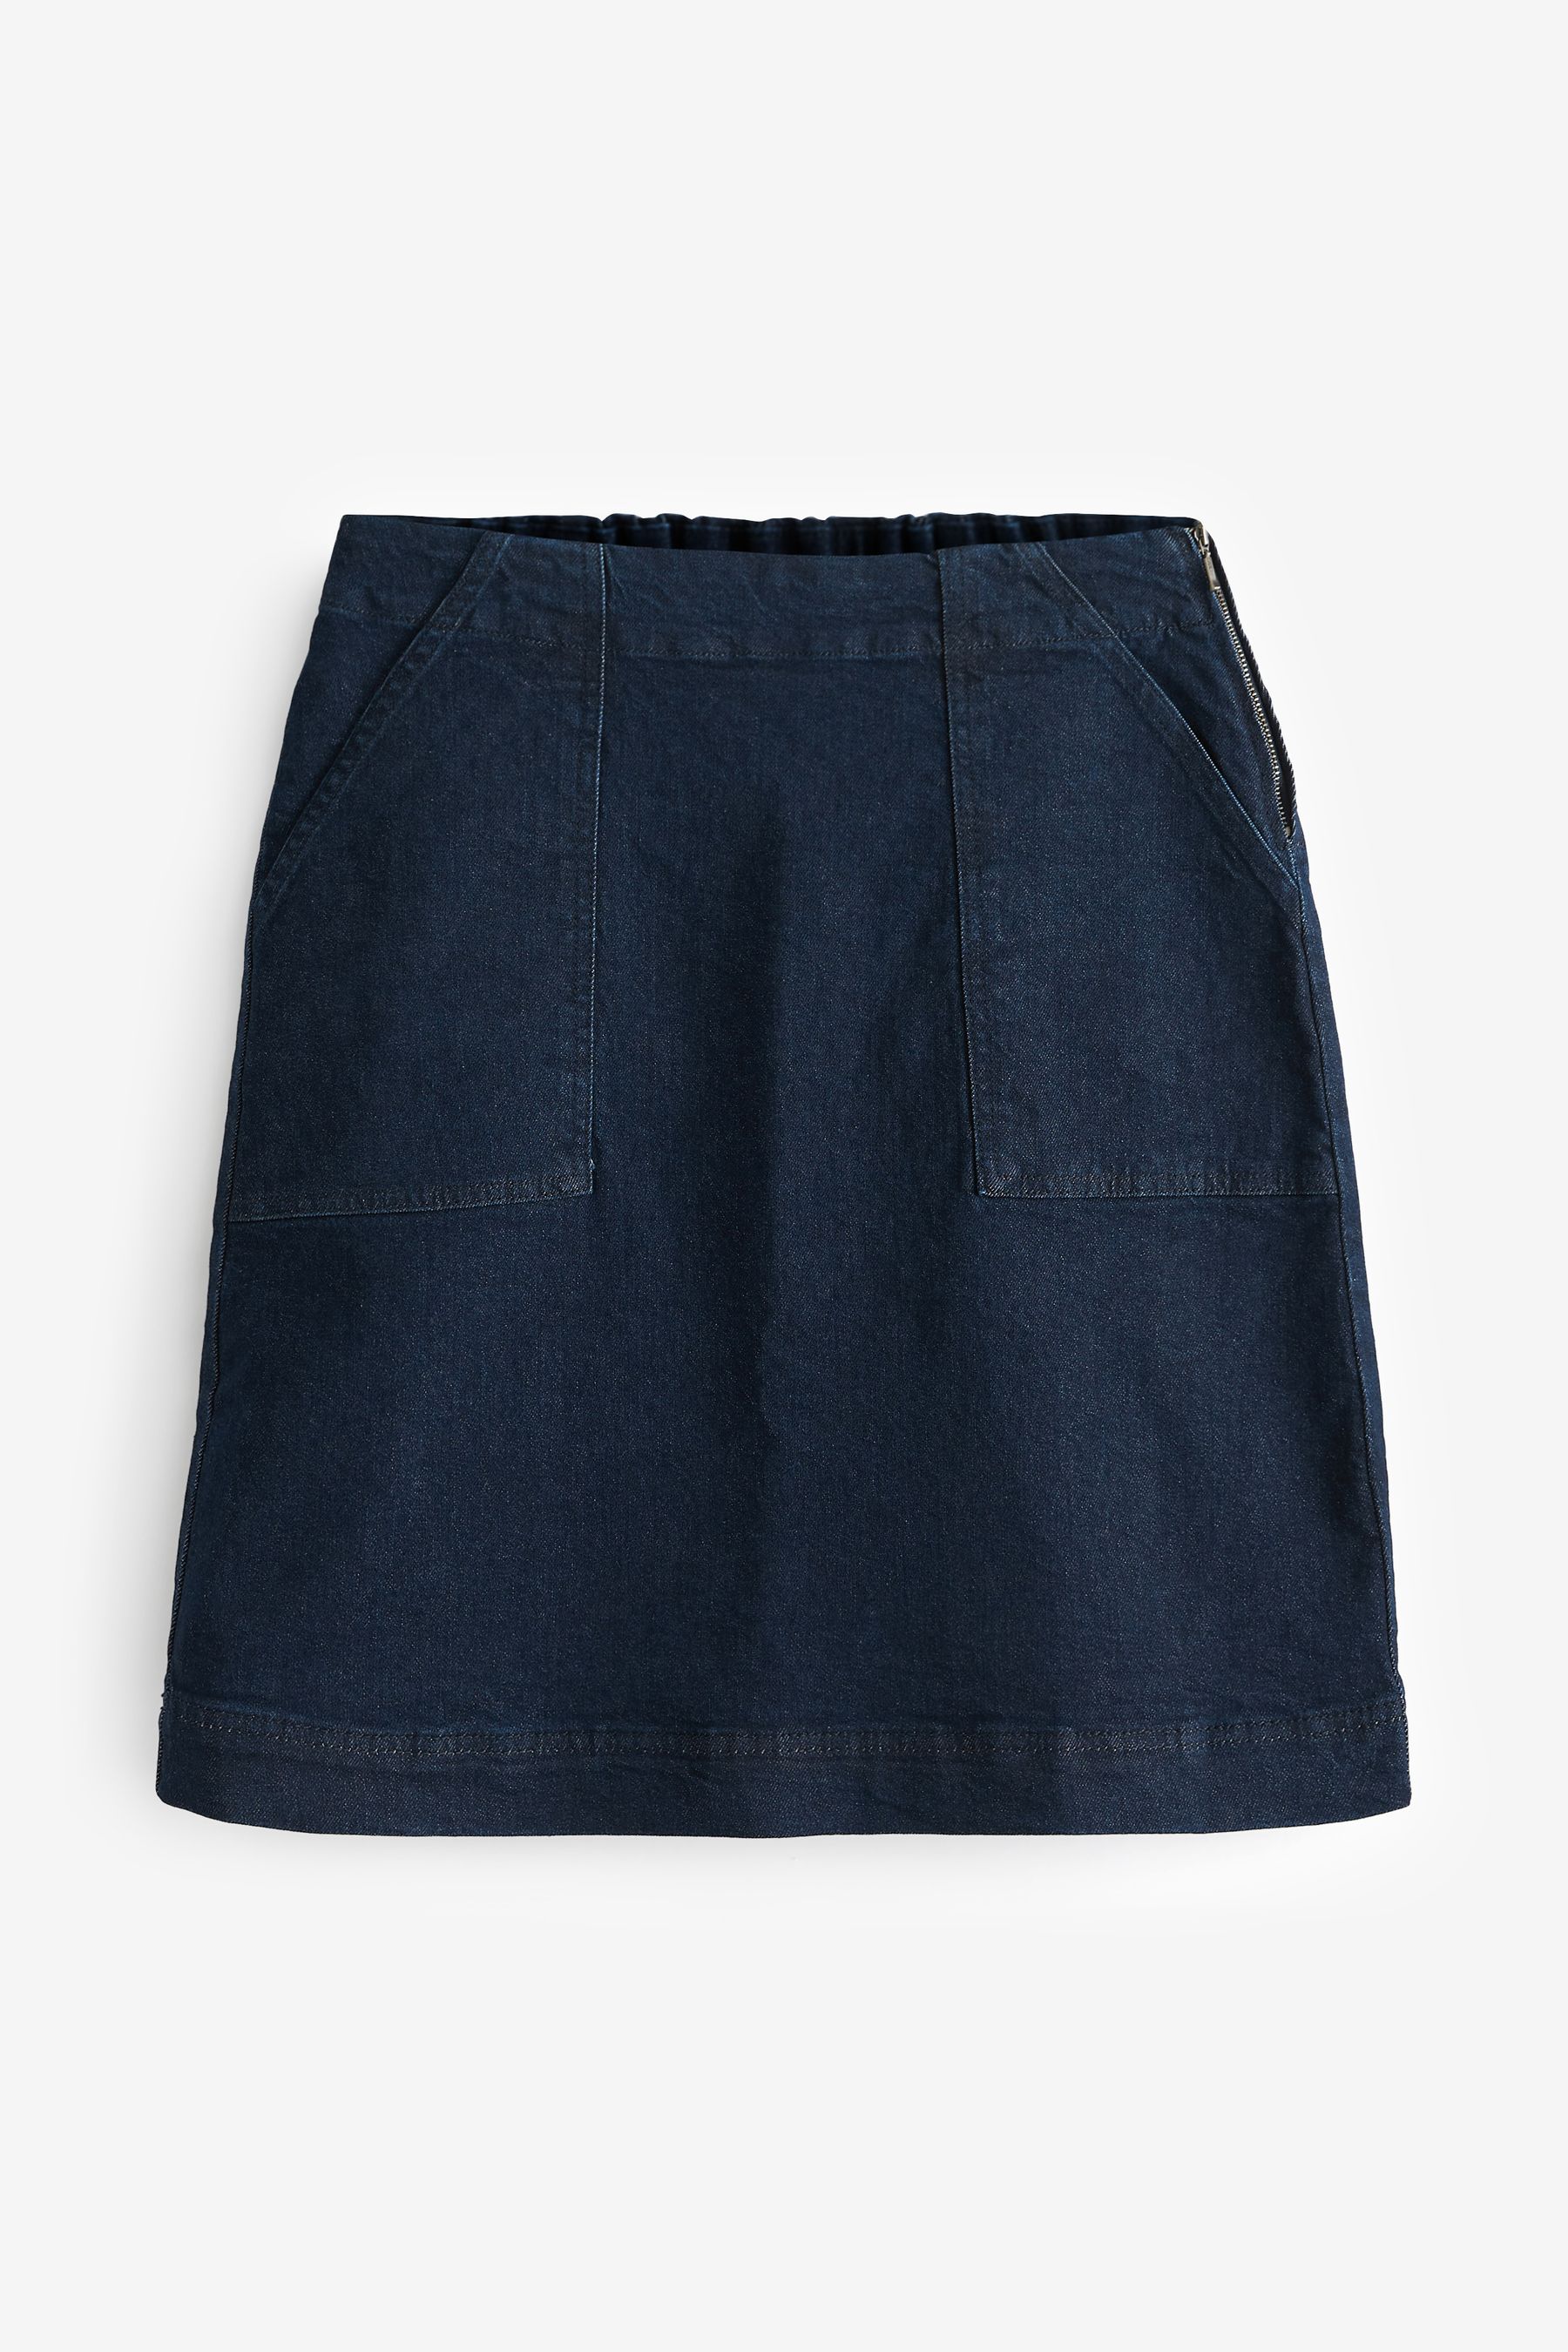 Buy Seasalt Cornwall A-Line Mays Rock Skirt from the Next UK online shop